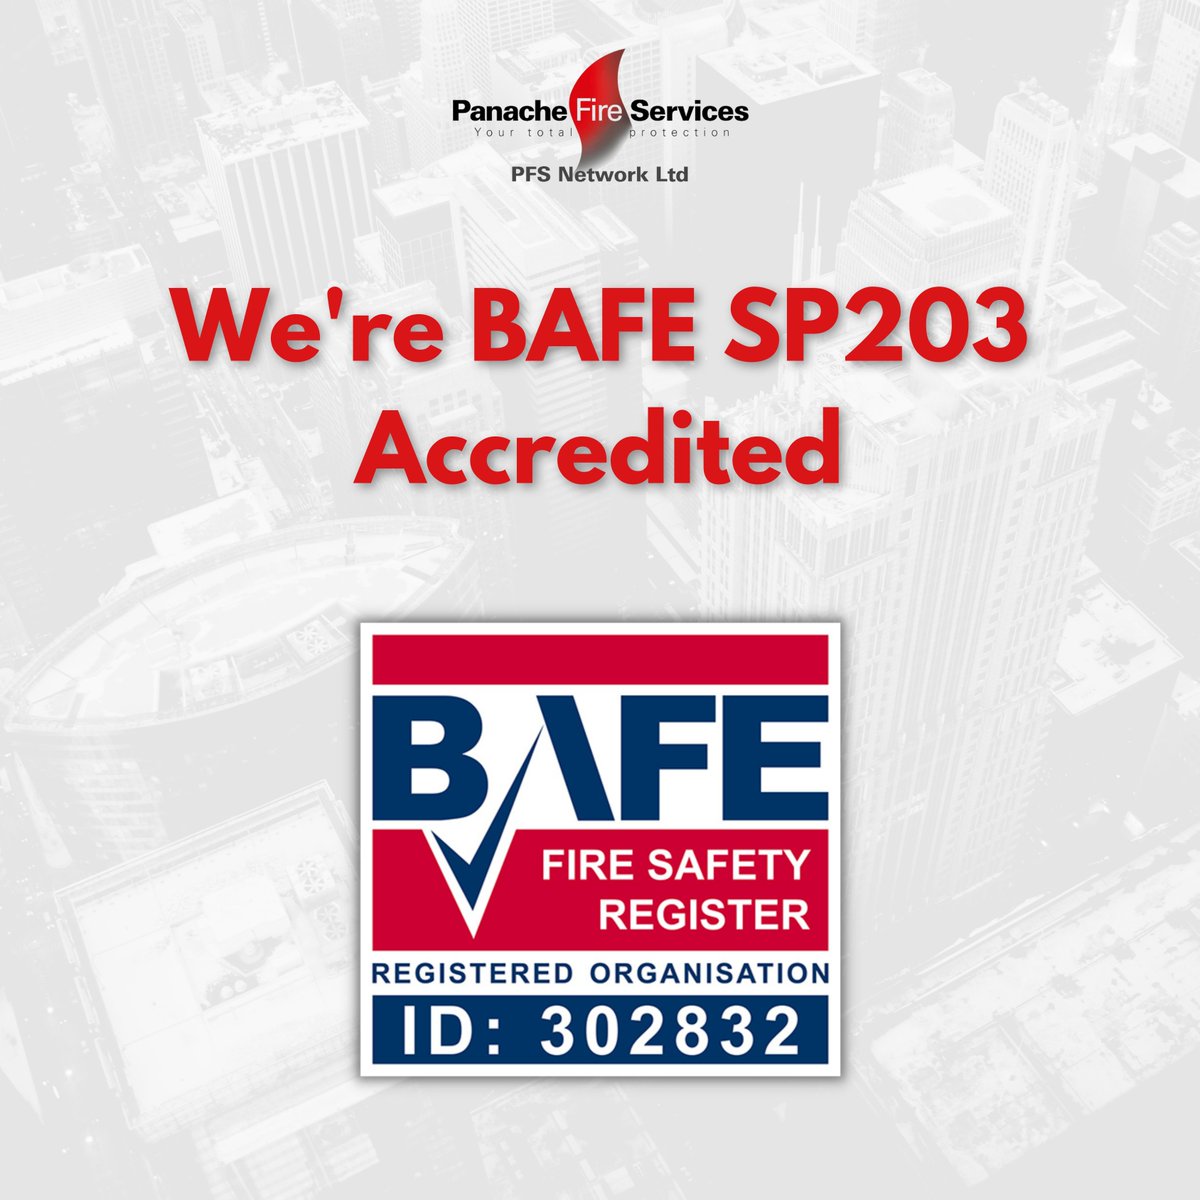 We're delighted to announce that PFS Network Ltd are now accredited under the BAFE SP203-1 scheme for the Design, Installation, Commission and Maintenance of Fire Detection and Fire Alarm Systems. Call us to arrange for a fire alarm expert to visit you.

#firealarms #firesafety